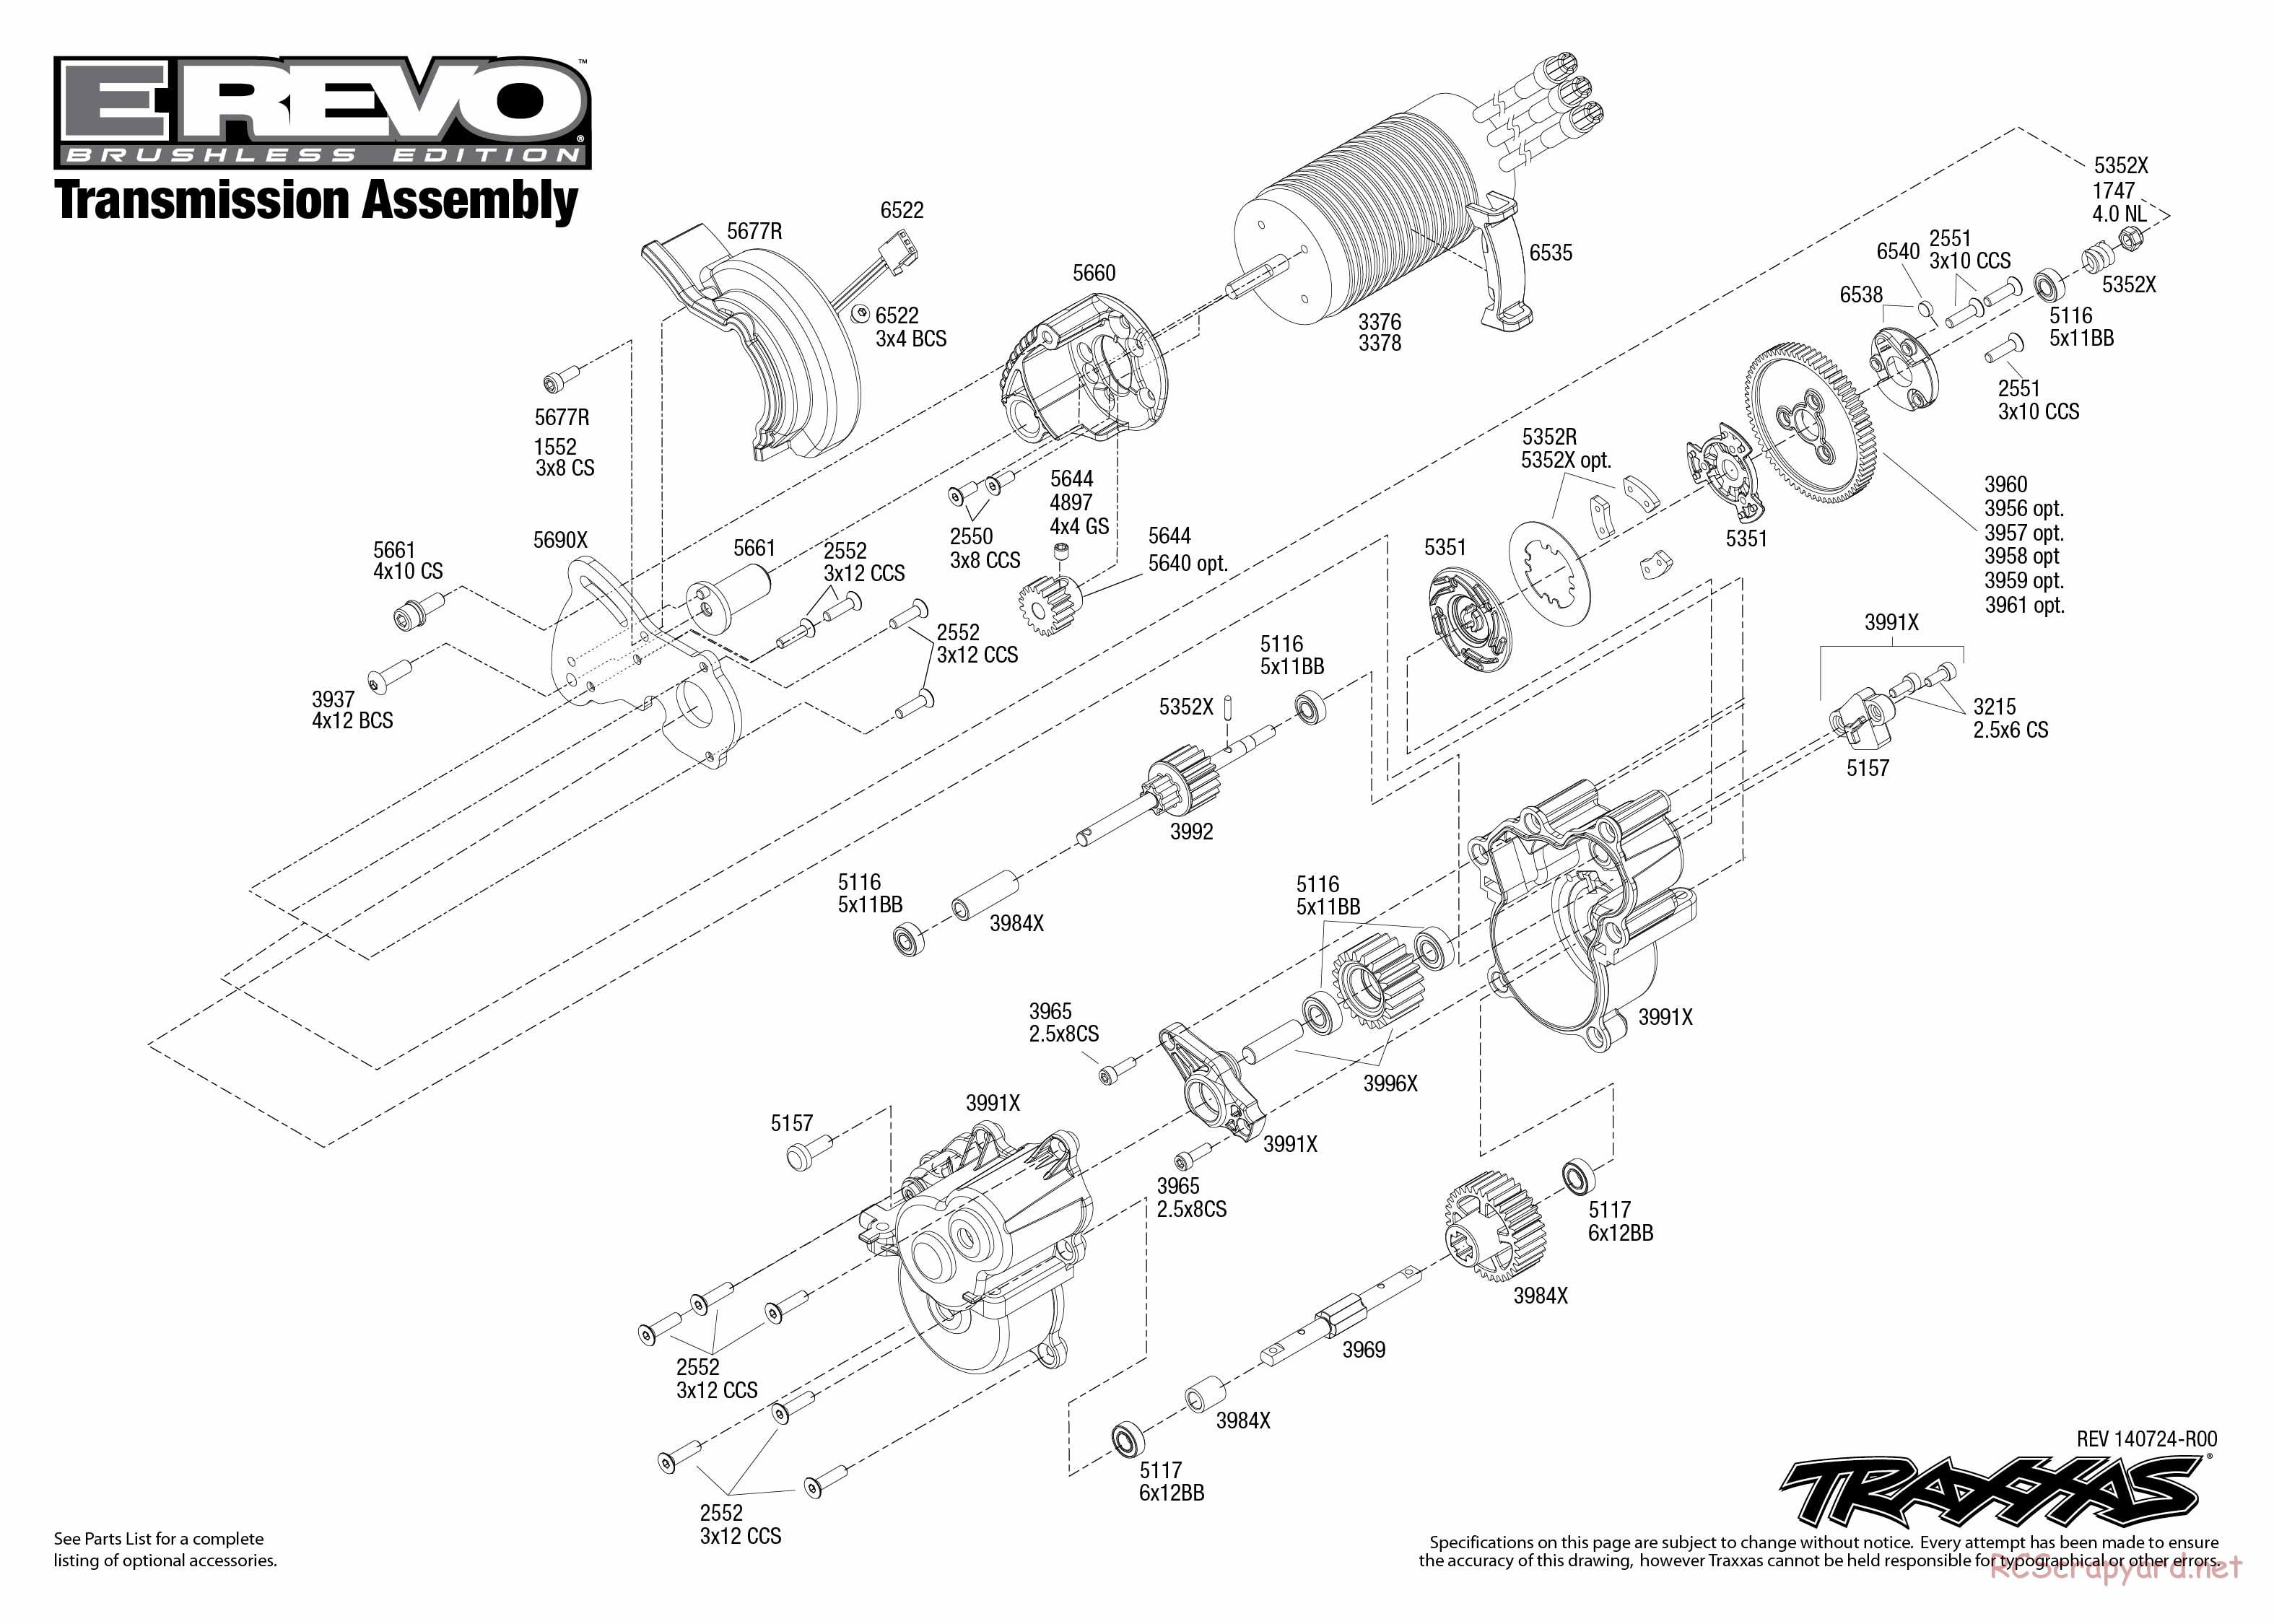 Traxxas - E-Revo Brushless (2015) - Exploded Views - Page 5